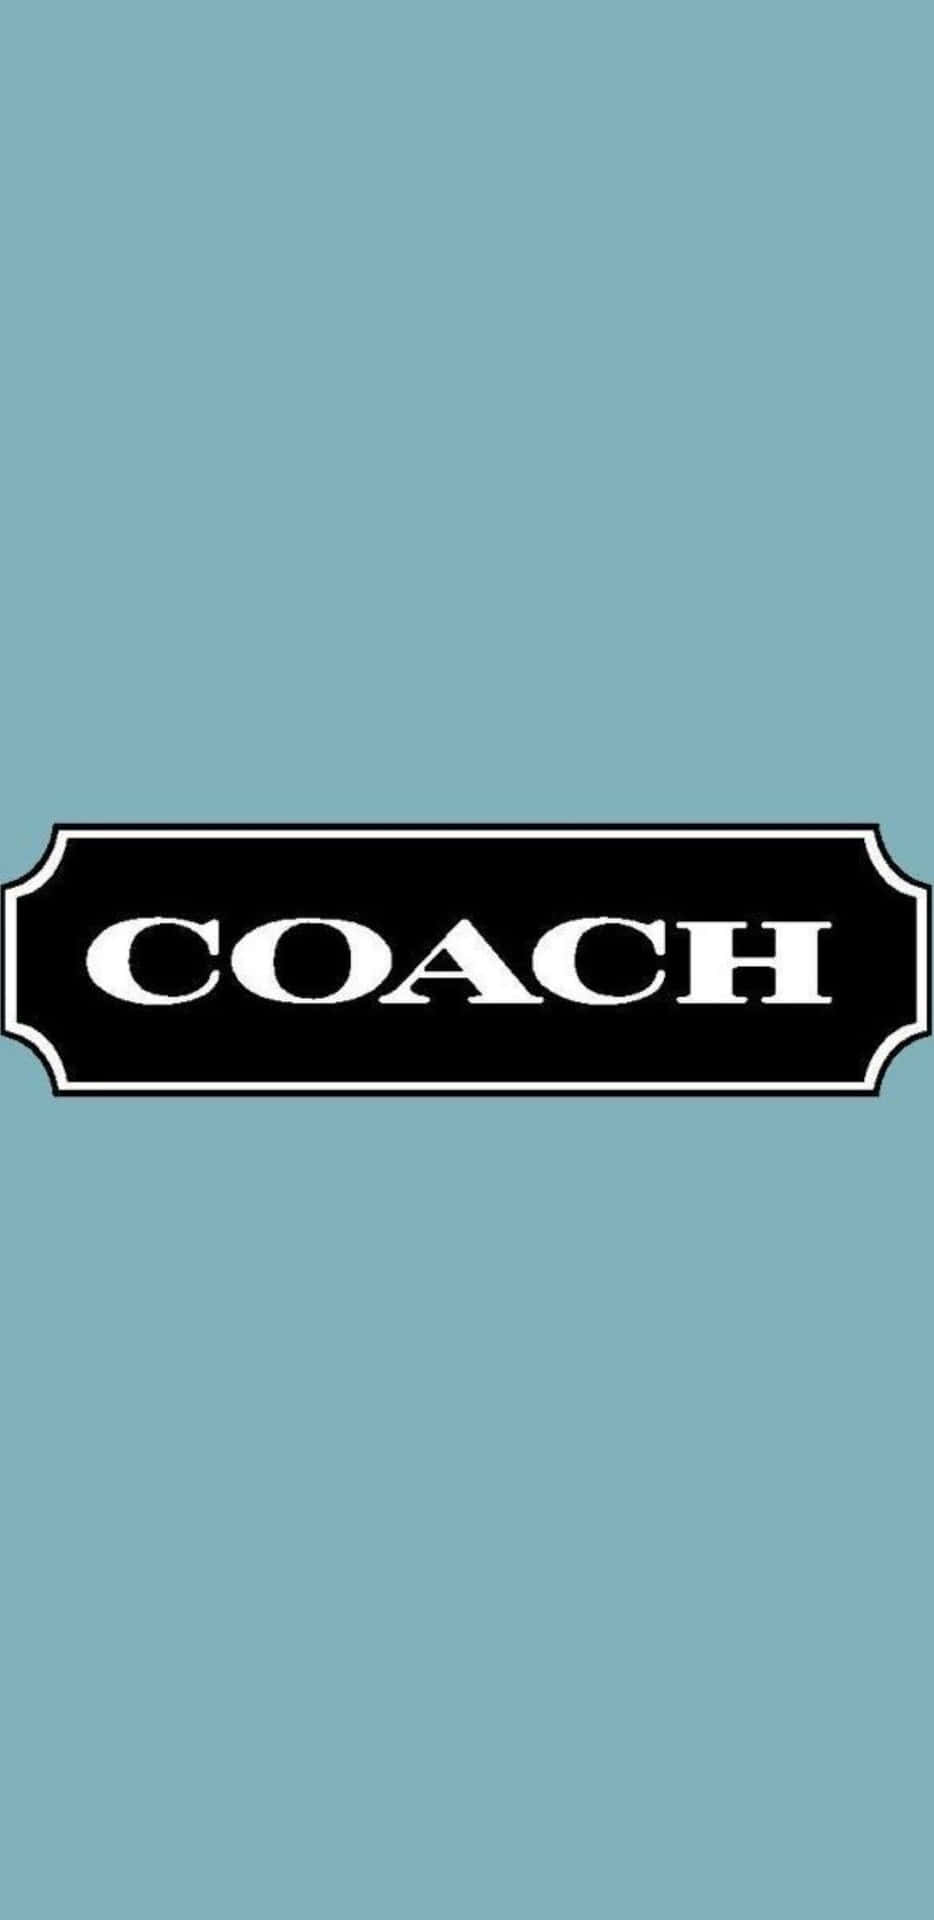 : Look stylish with Coach's newest collection